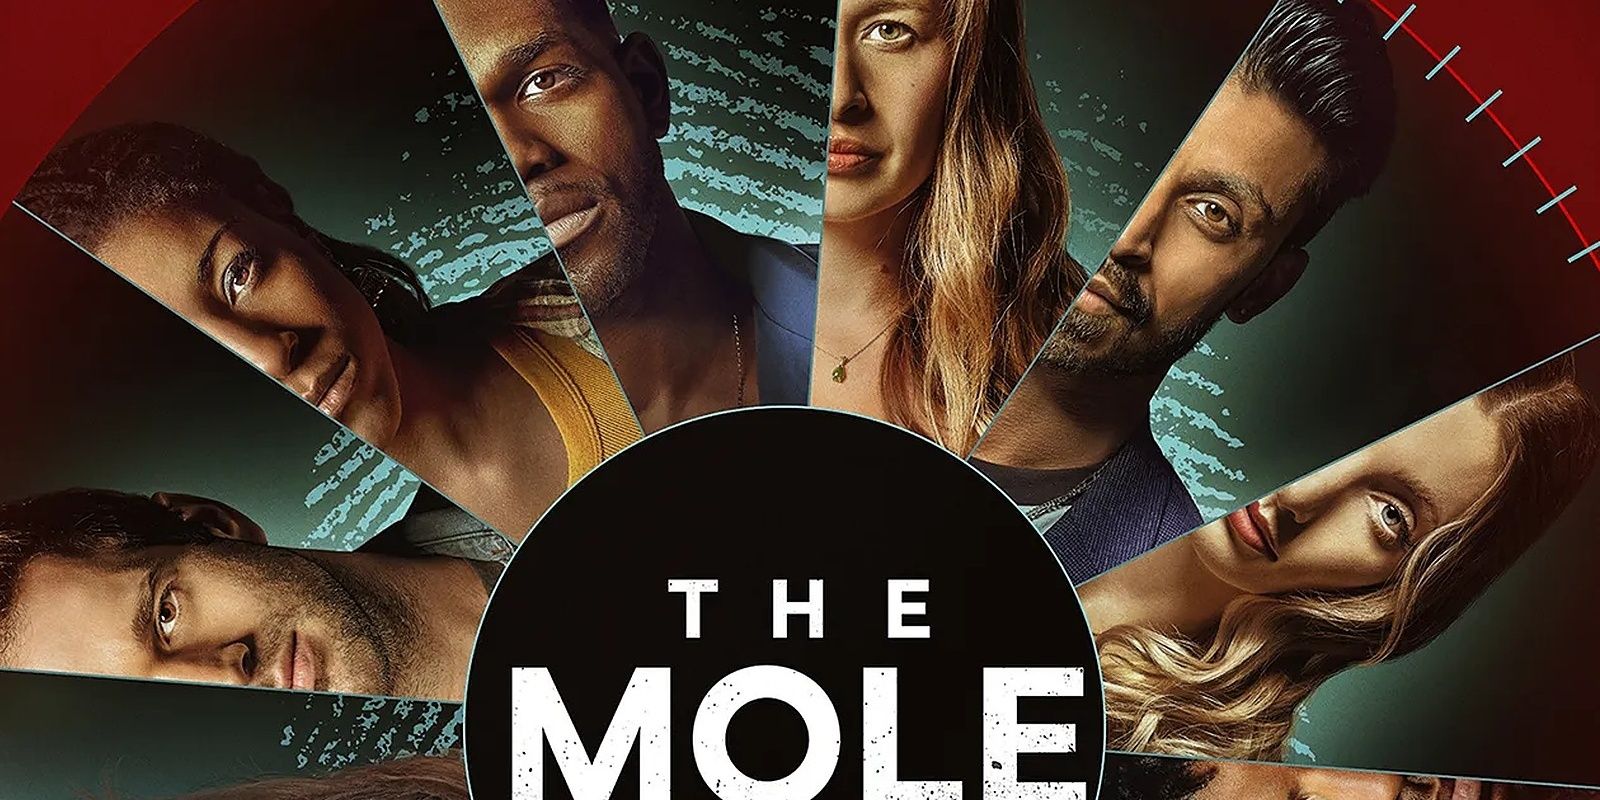 The Mole: Joi Schweitzer Explains Why She Took ,000 From The Group